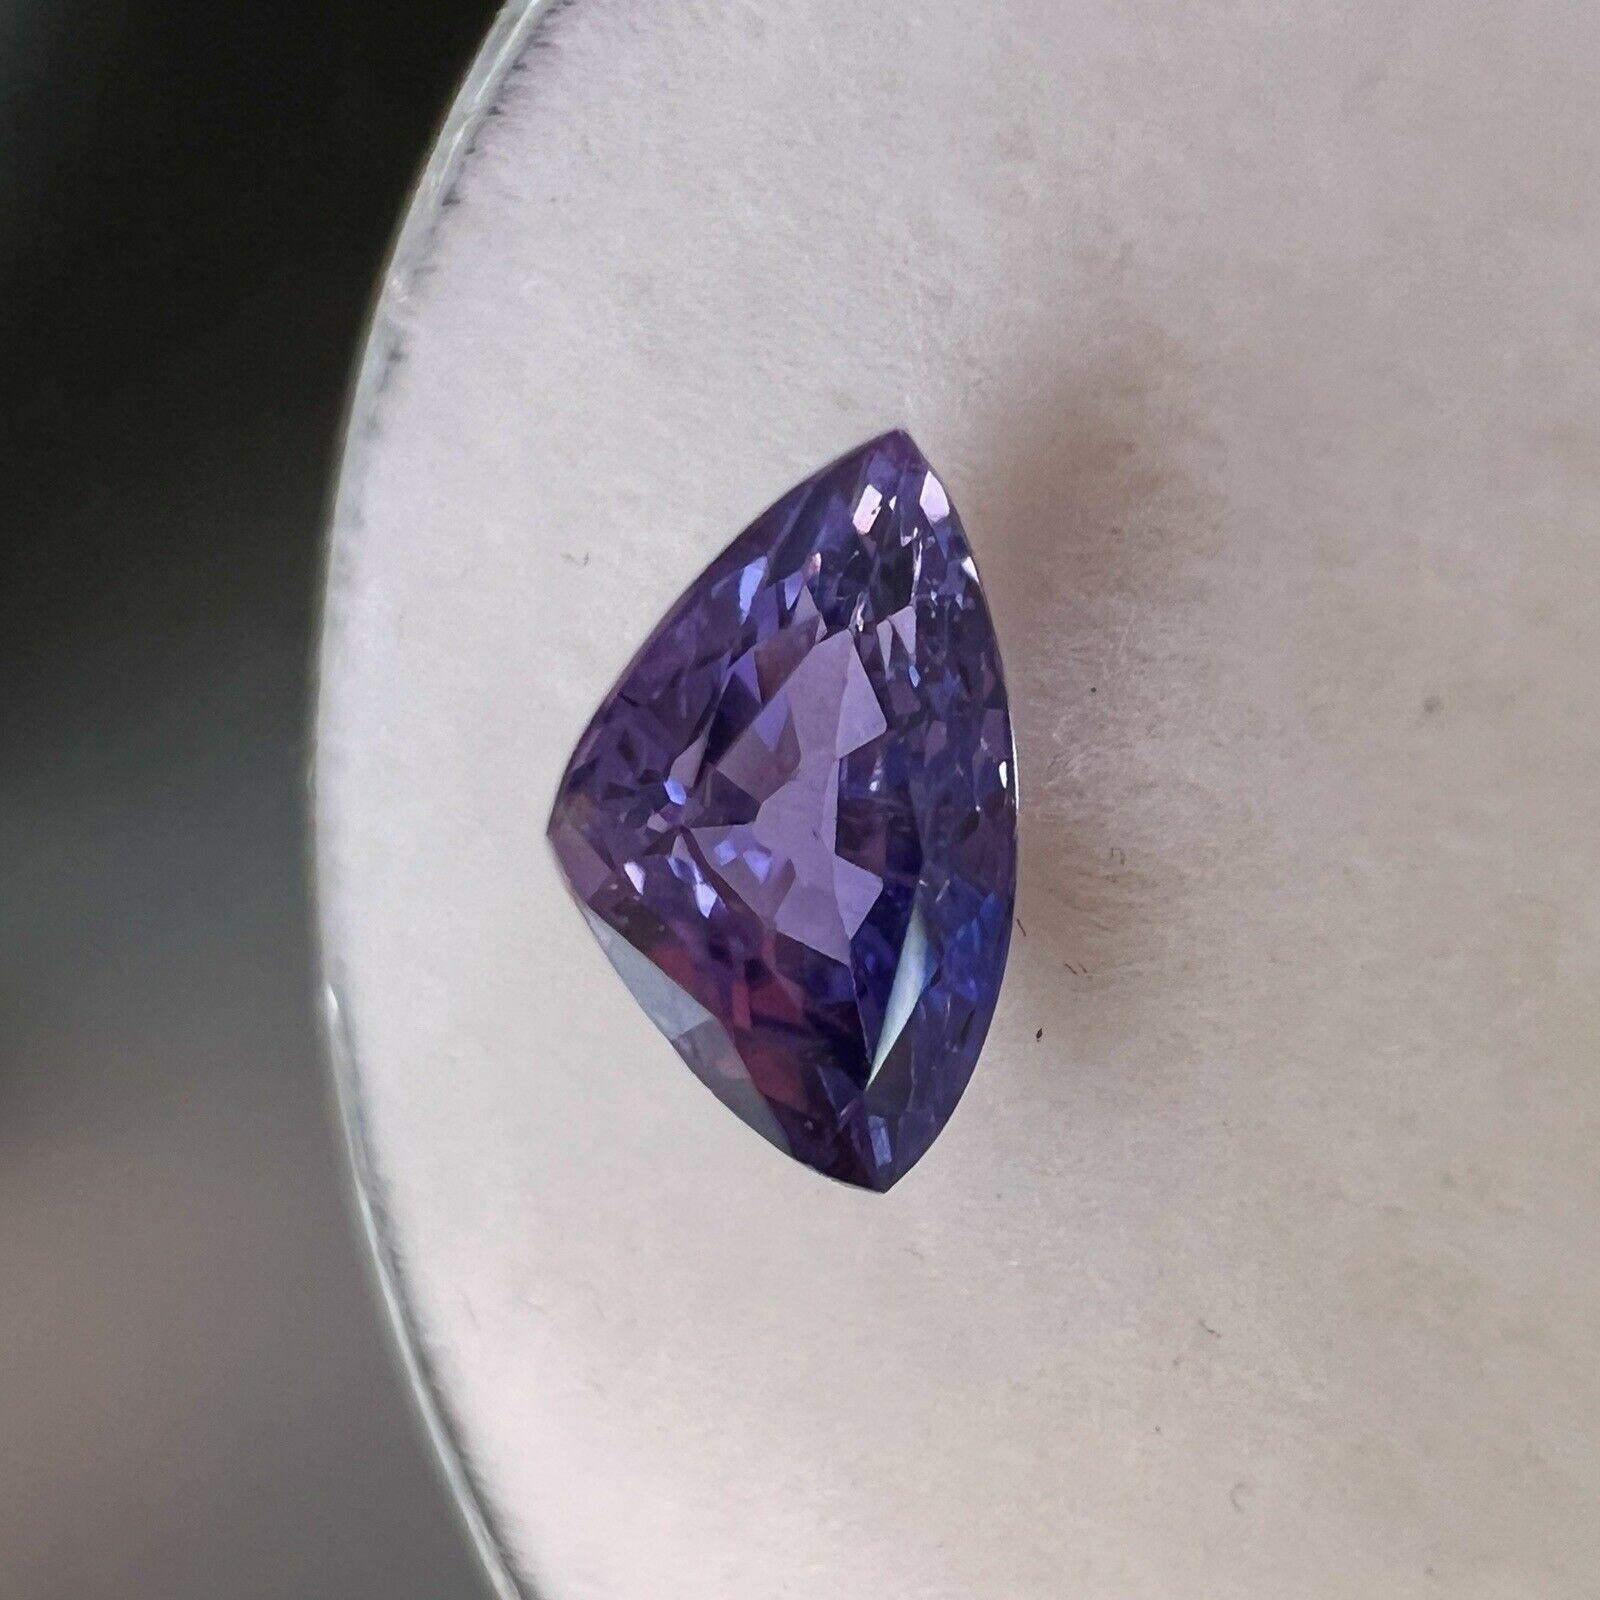 1.08ct Fine Deep Purple Sapphire Trillion Triangle Cut Loose Gem 7.6x4.7mm

Natural Deep Purple Sapphire Gemstone.
1.08 Carat with a beautiful deep purple colour and good clarity, some small natural inclusions visible when looking closely. Also has